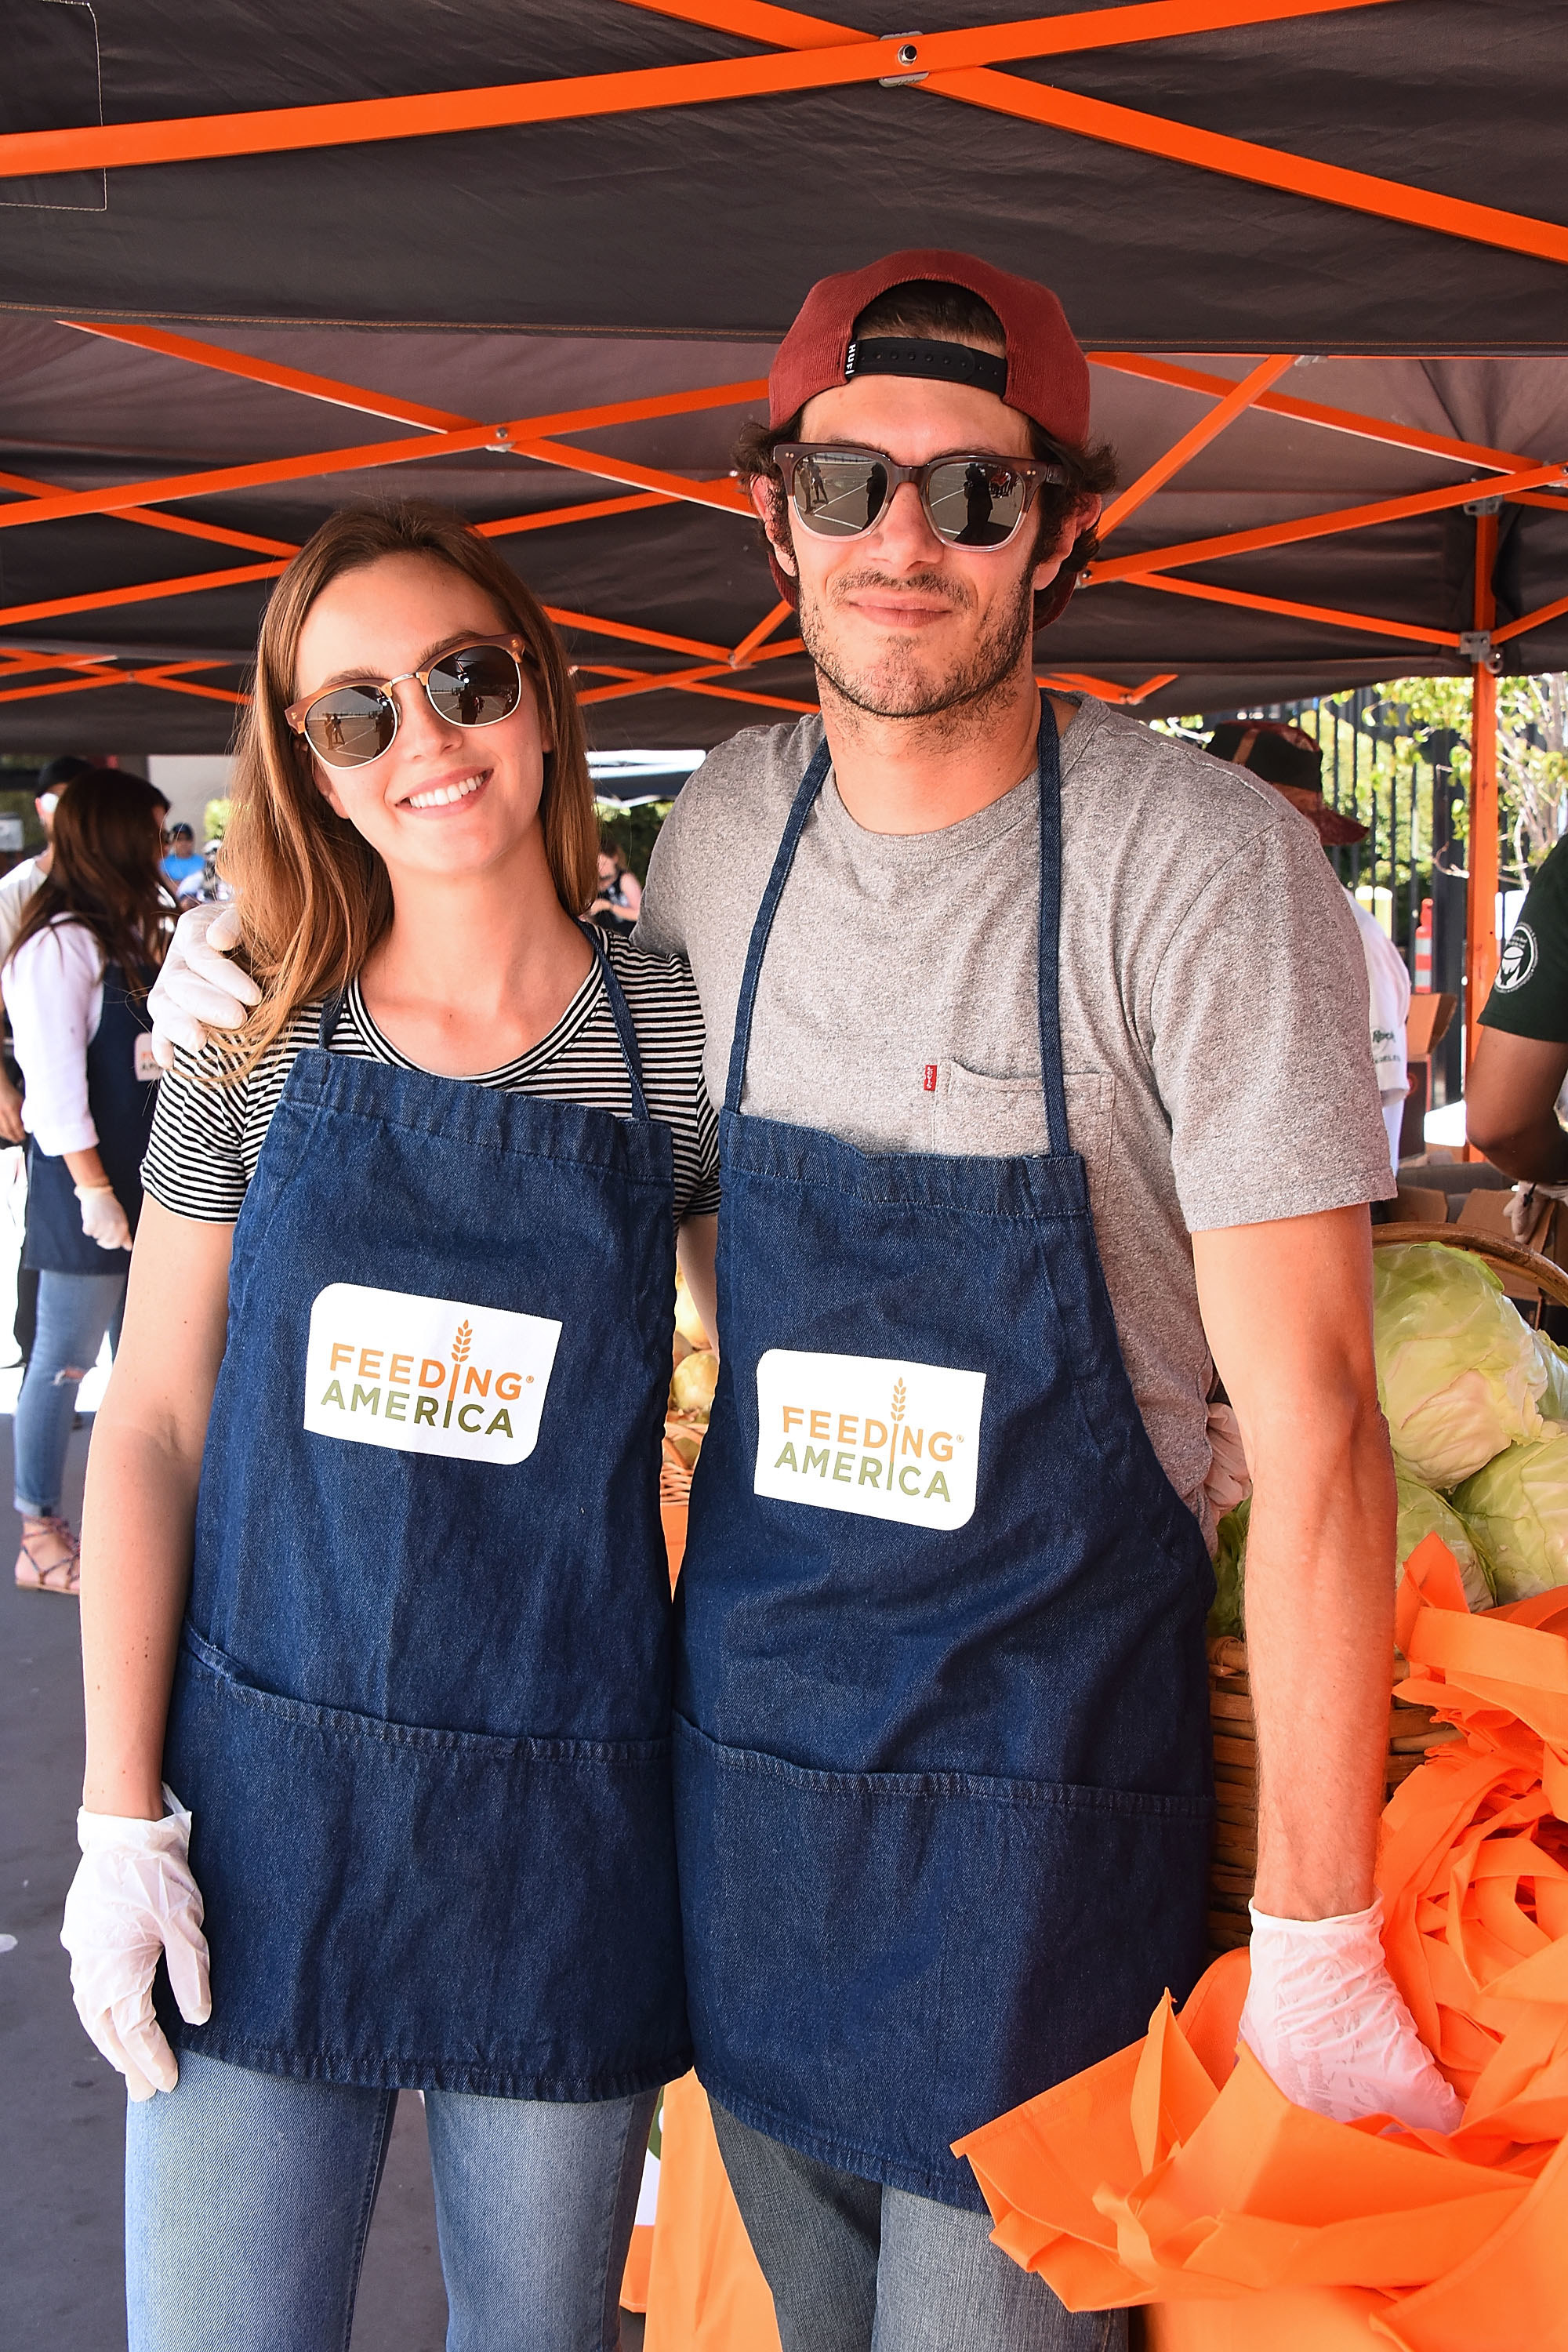 Meester and Brody volunteering at a Feeding America event in Los Angeles in 2017